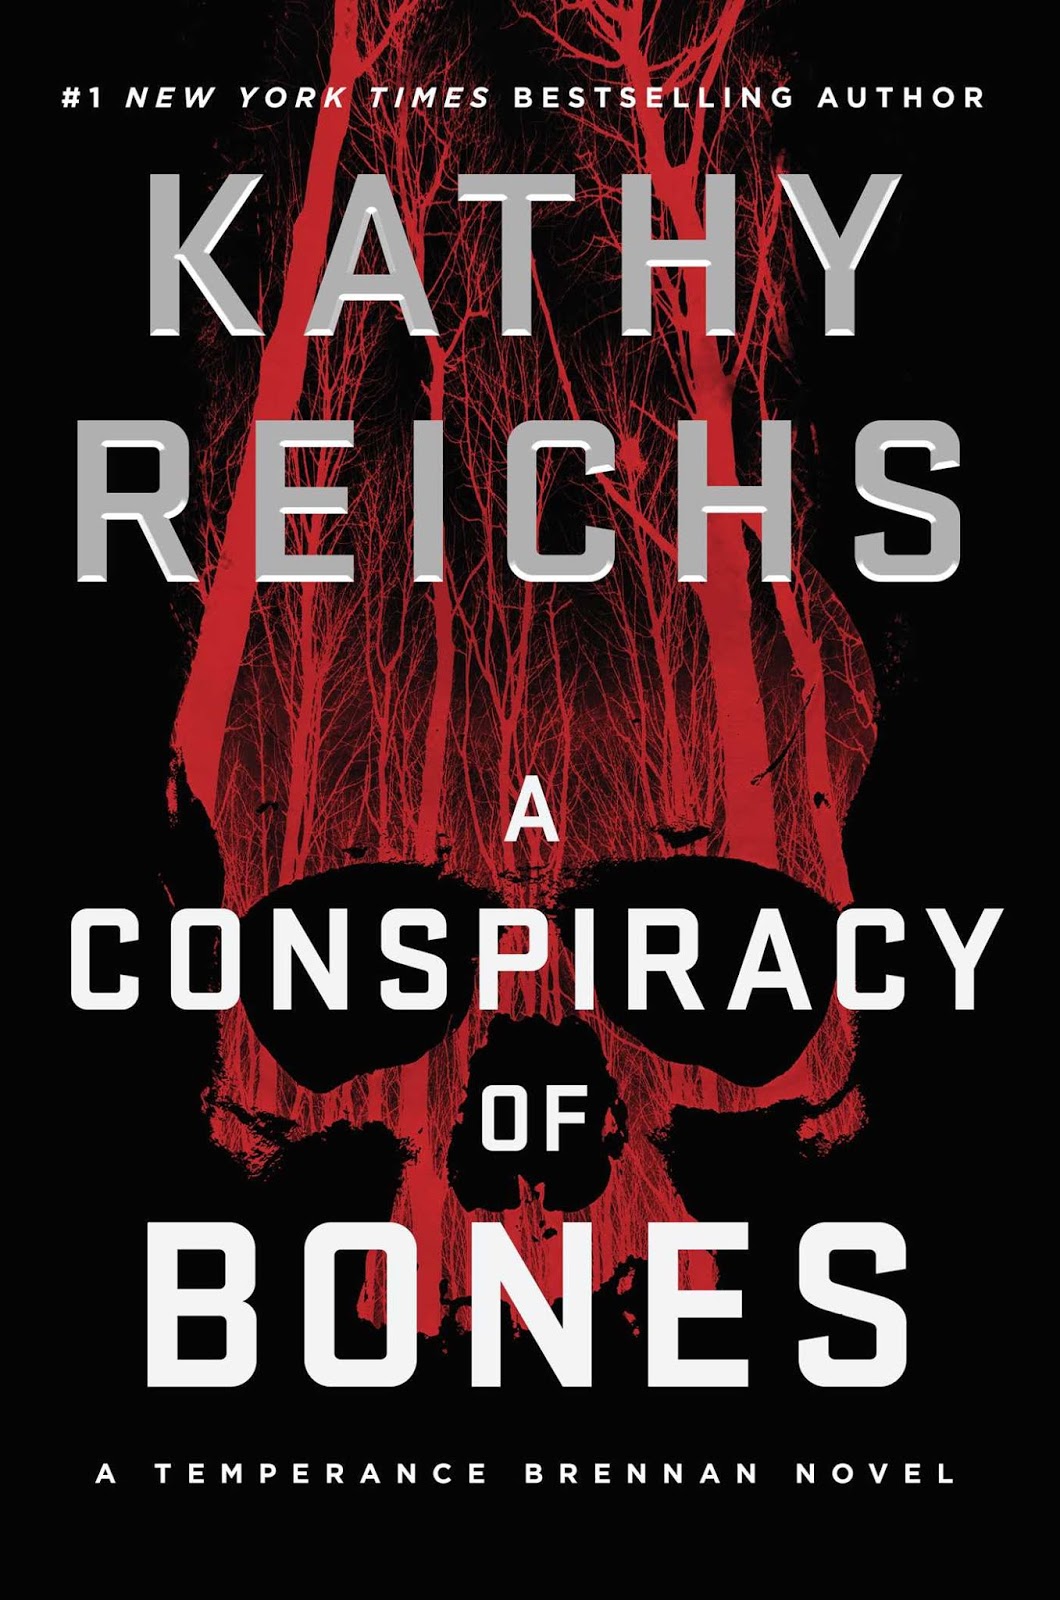 Short & Sweet Review: A Conspiracy of Bones by Kathy Reichs (audio)